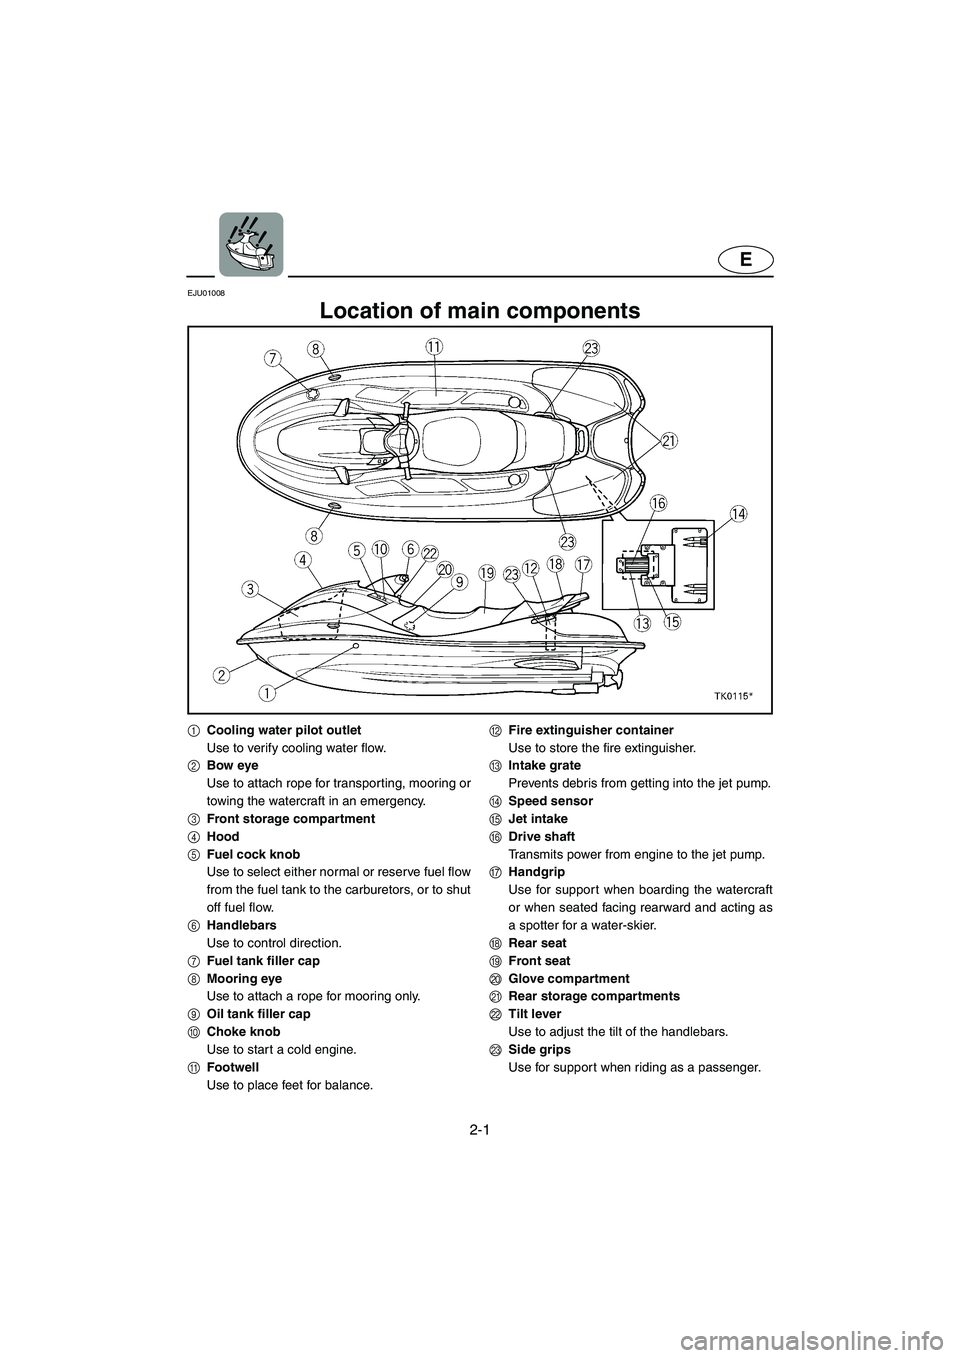 YAMAHA SUV 1200 2003  Owners Manual 2-1
E
EJU01008 
Location of main components 
1Cooling water pilot outlet
Use to verify cooling water flow.
2Bow eye
Use to attach rope for transporting, mooring or
towing the watercraft in an emergenc